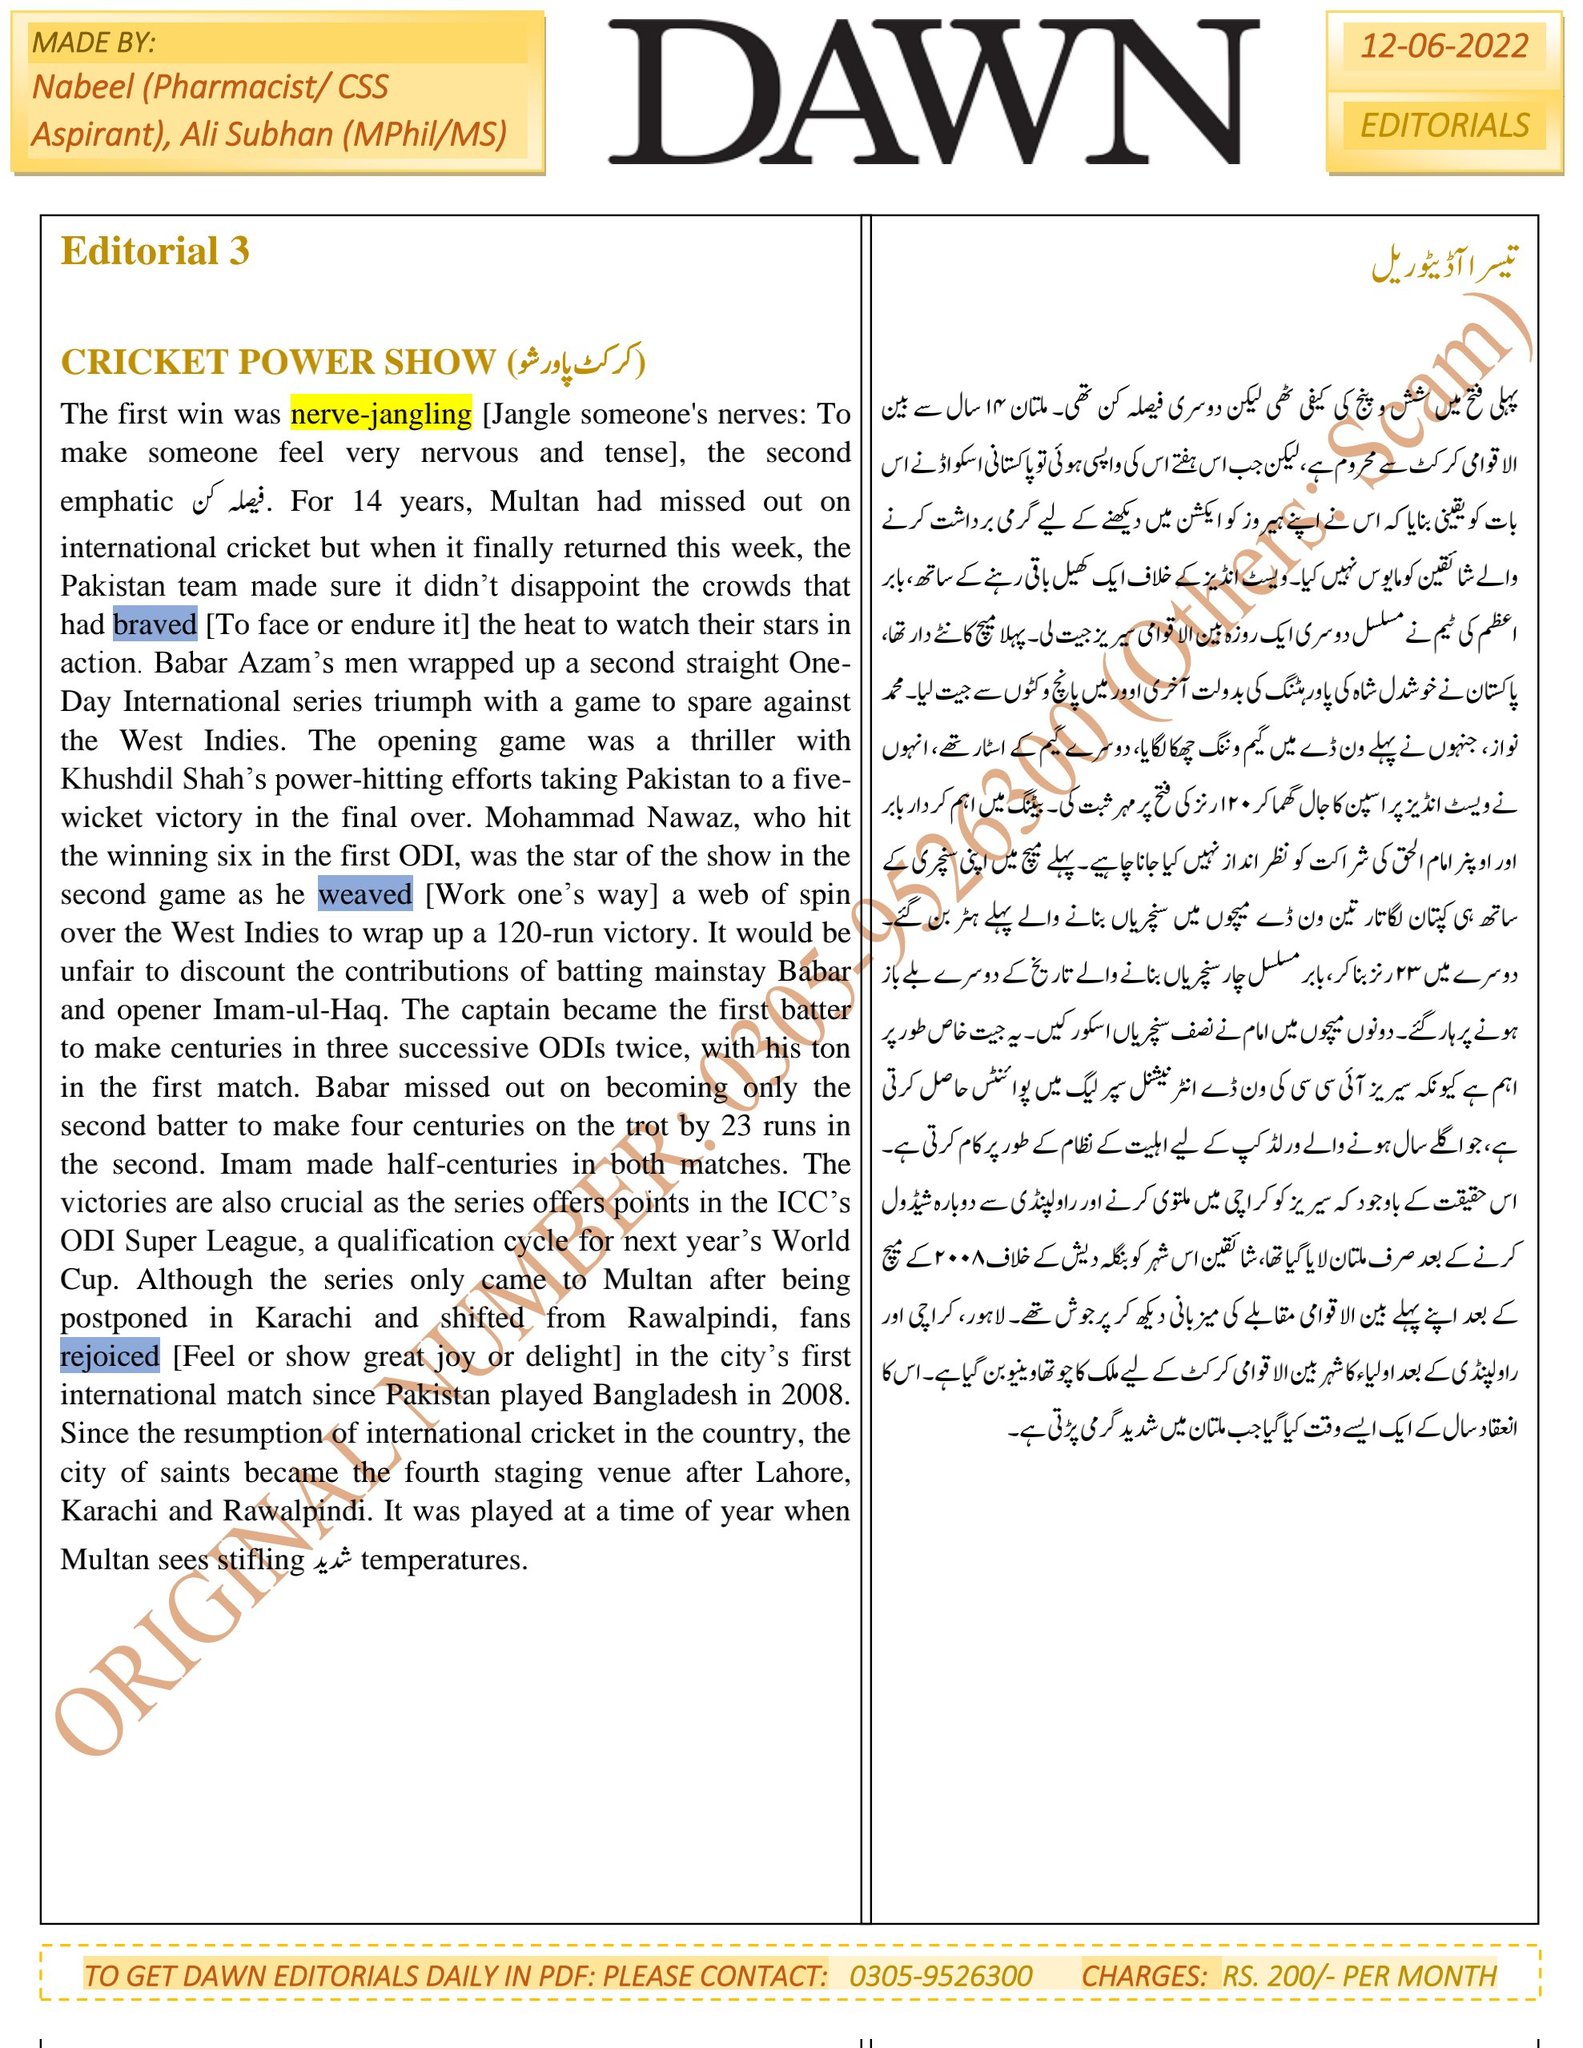 Daily DAWN News Vocabulary with Urdu Meaning (16 July 2020)